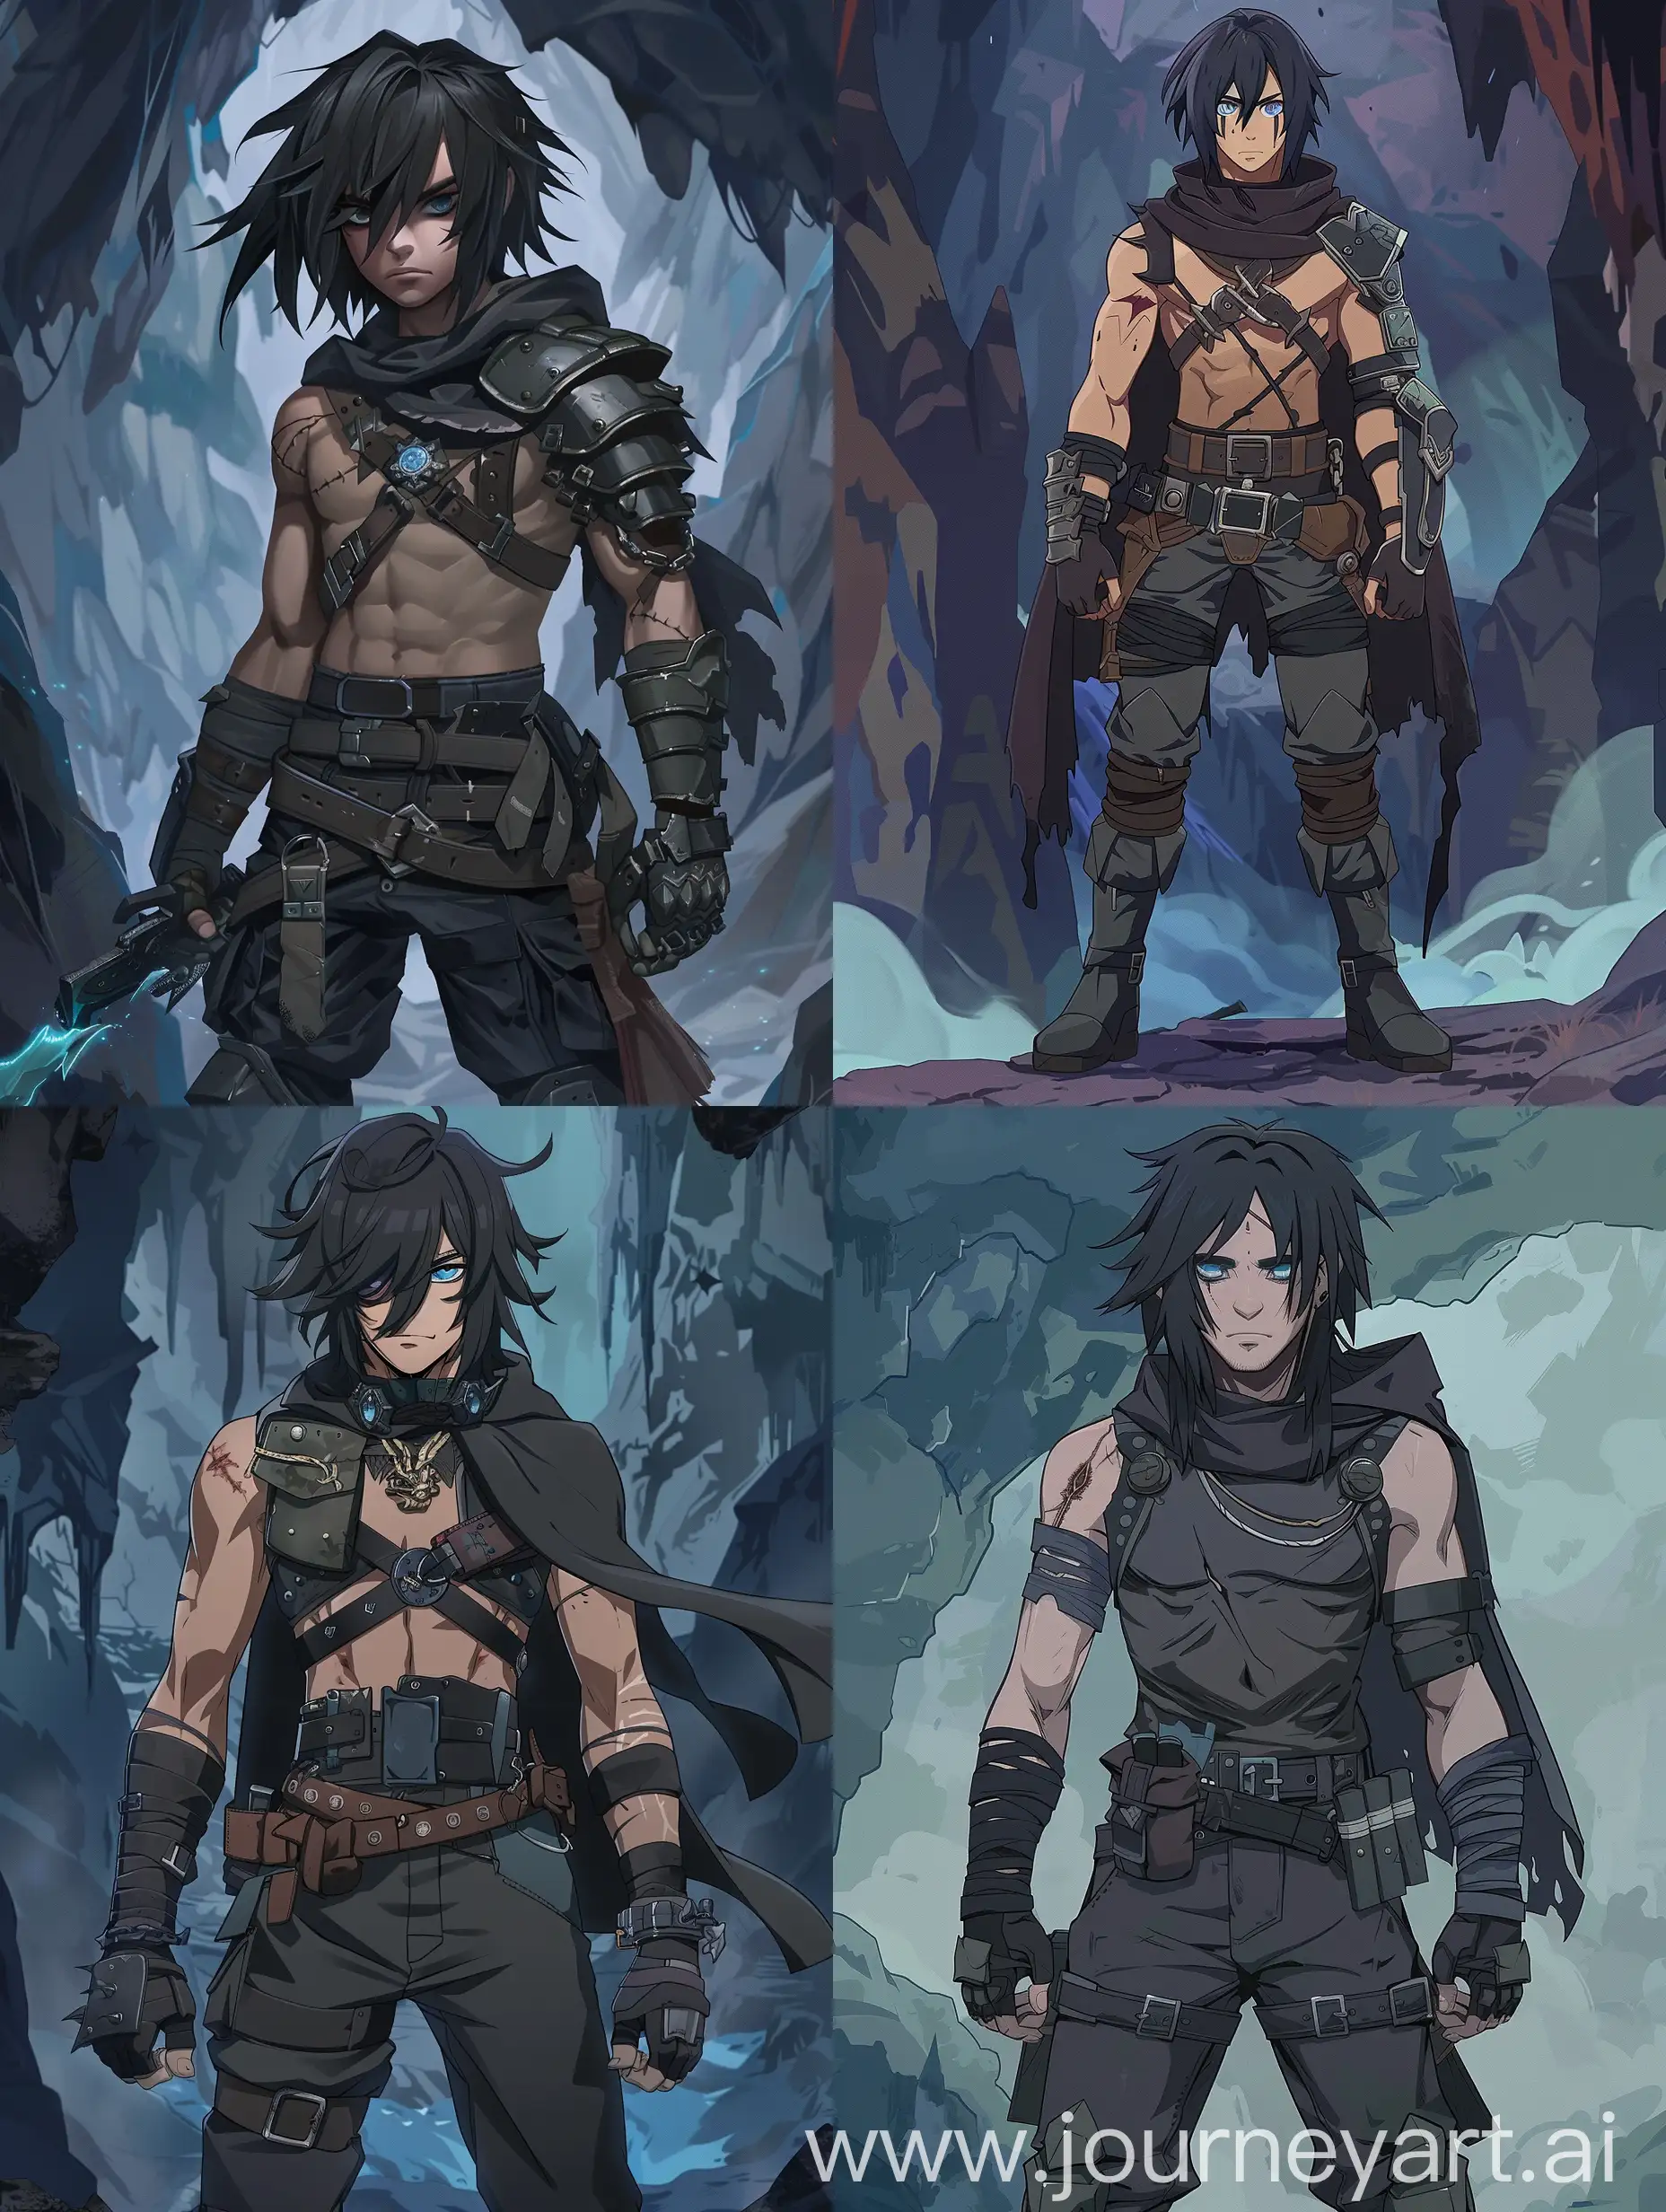 Create a 2D anime character illustration of Kaito 'The Abyssal Sentinel' Harrow, a male Cave Raider from 'Made in Abyss.' He should have a tall, muscular build with shoulder-length jet black hair and a scar over his left eye. His piercing steel blue eyes should reflect a lifetime spent in the Abyss. He wears a dark, sleeveless top with armored plates, durable fingerless gloves, and reinforced bracers. His charcoal pants are tucked into heavy-duty boots, and he has a utility belt with a sheath for his first-grade relic weapon, 'The Eclipse Reaper,' a sword with a phasing blade. Include a rugged cloak with a hood and a necklace with an Abyssal gemstone pendant. Capture his aggressive nature and seasoned explorer's aura in a dynamic and atmospheric setting that hints at the depths of the Abyss."
